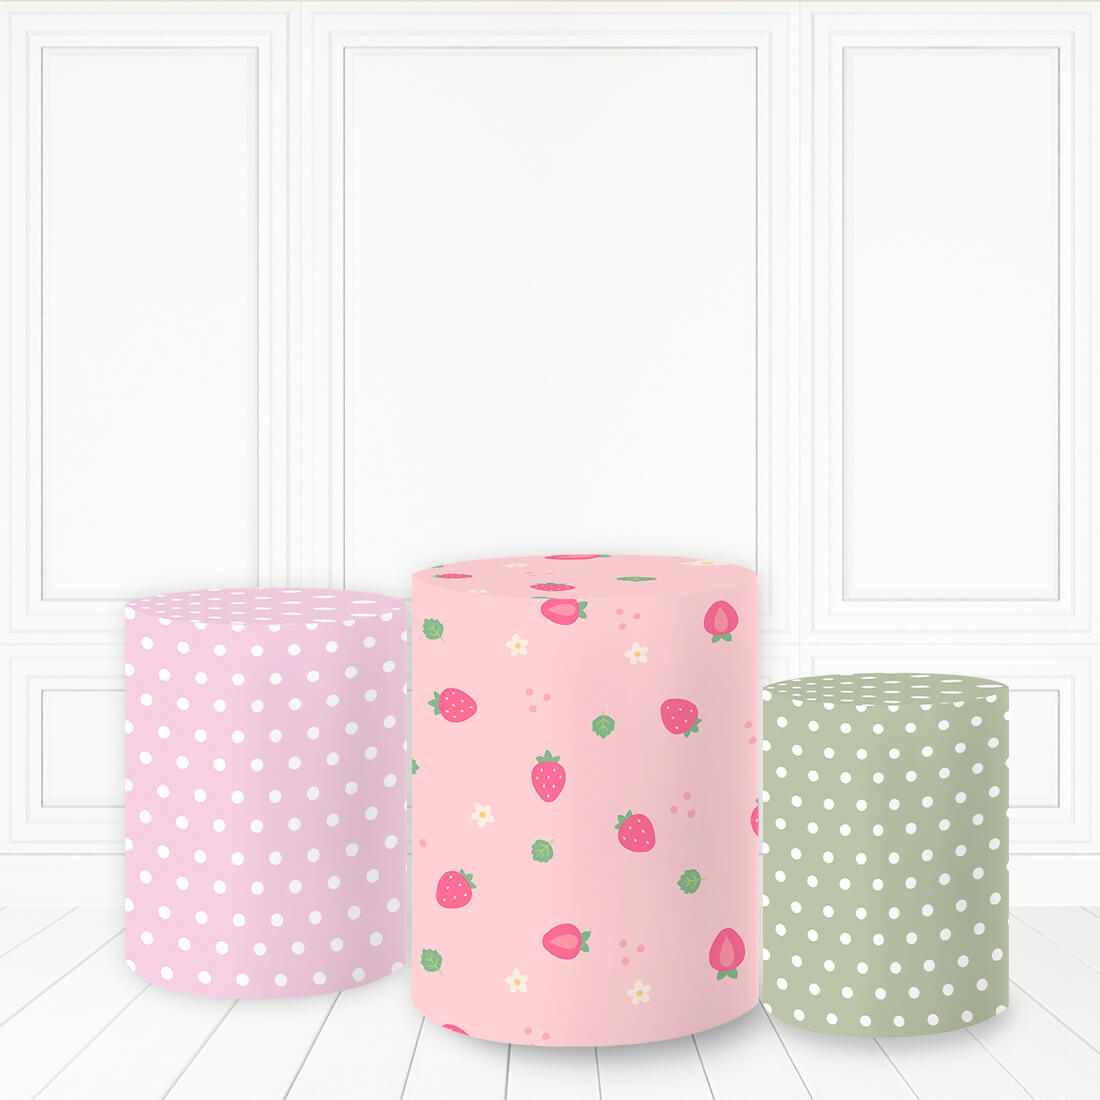 Lofaris Pink Strawberry Plinth Cover Simple Dots Cake Table